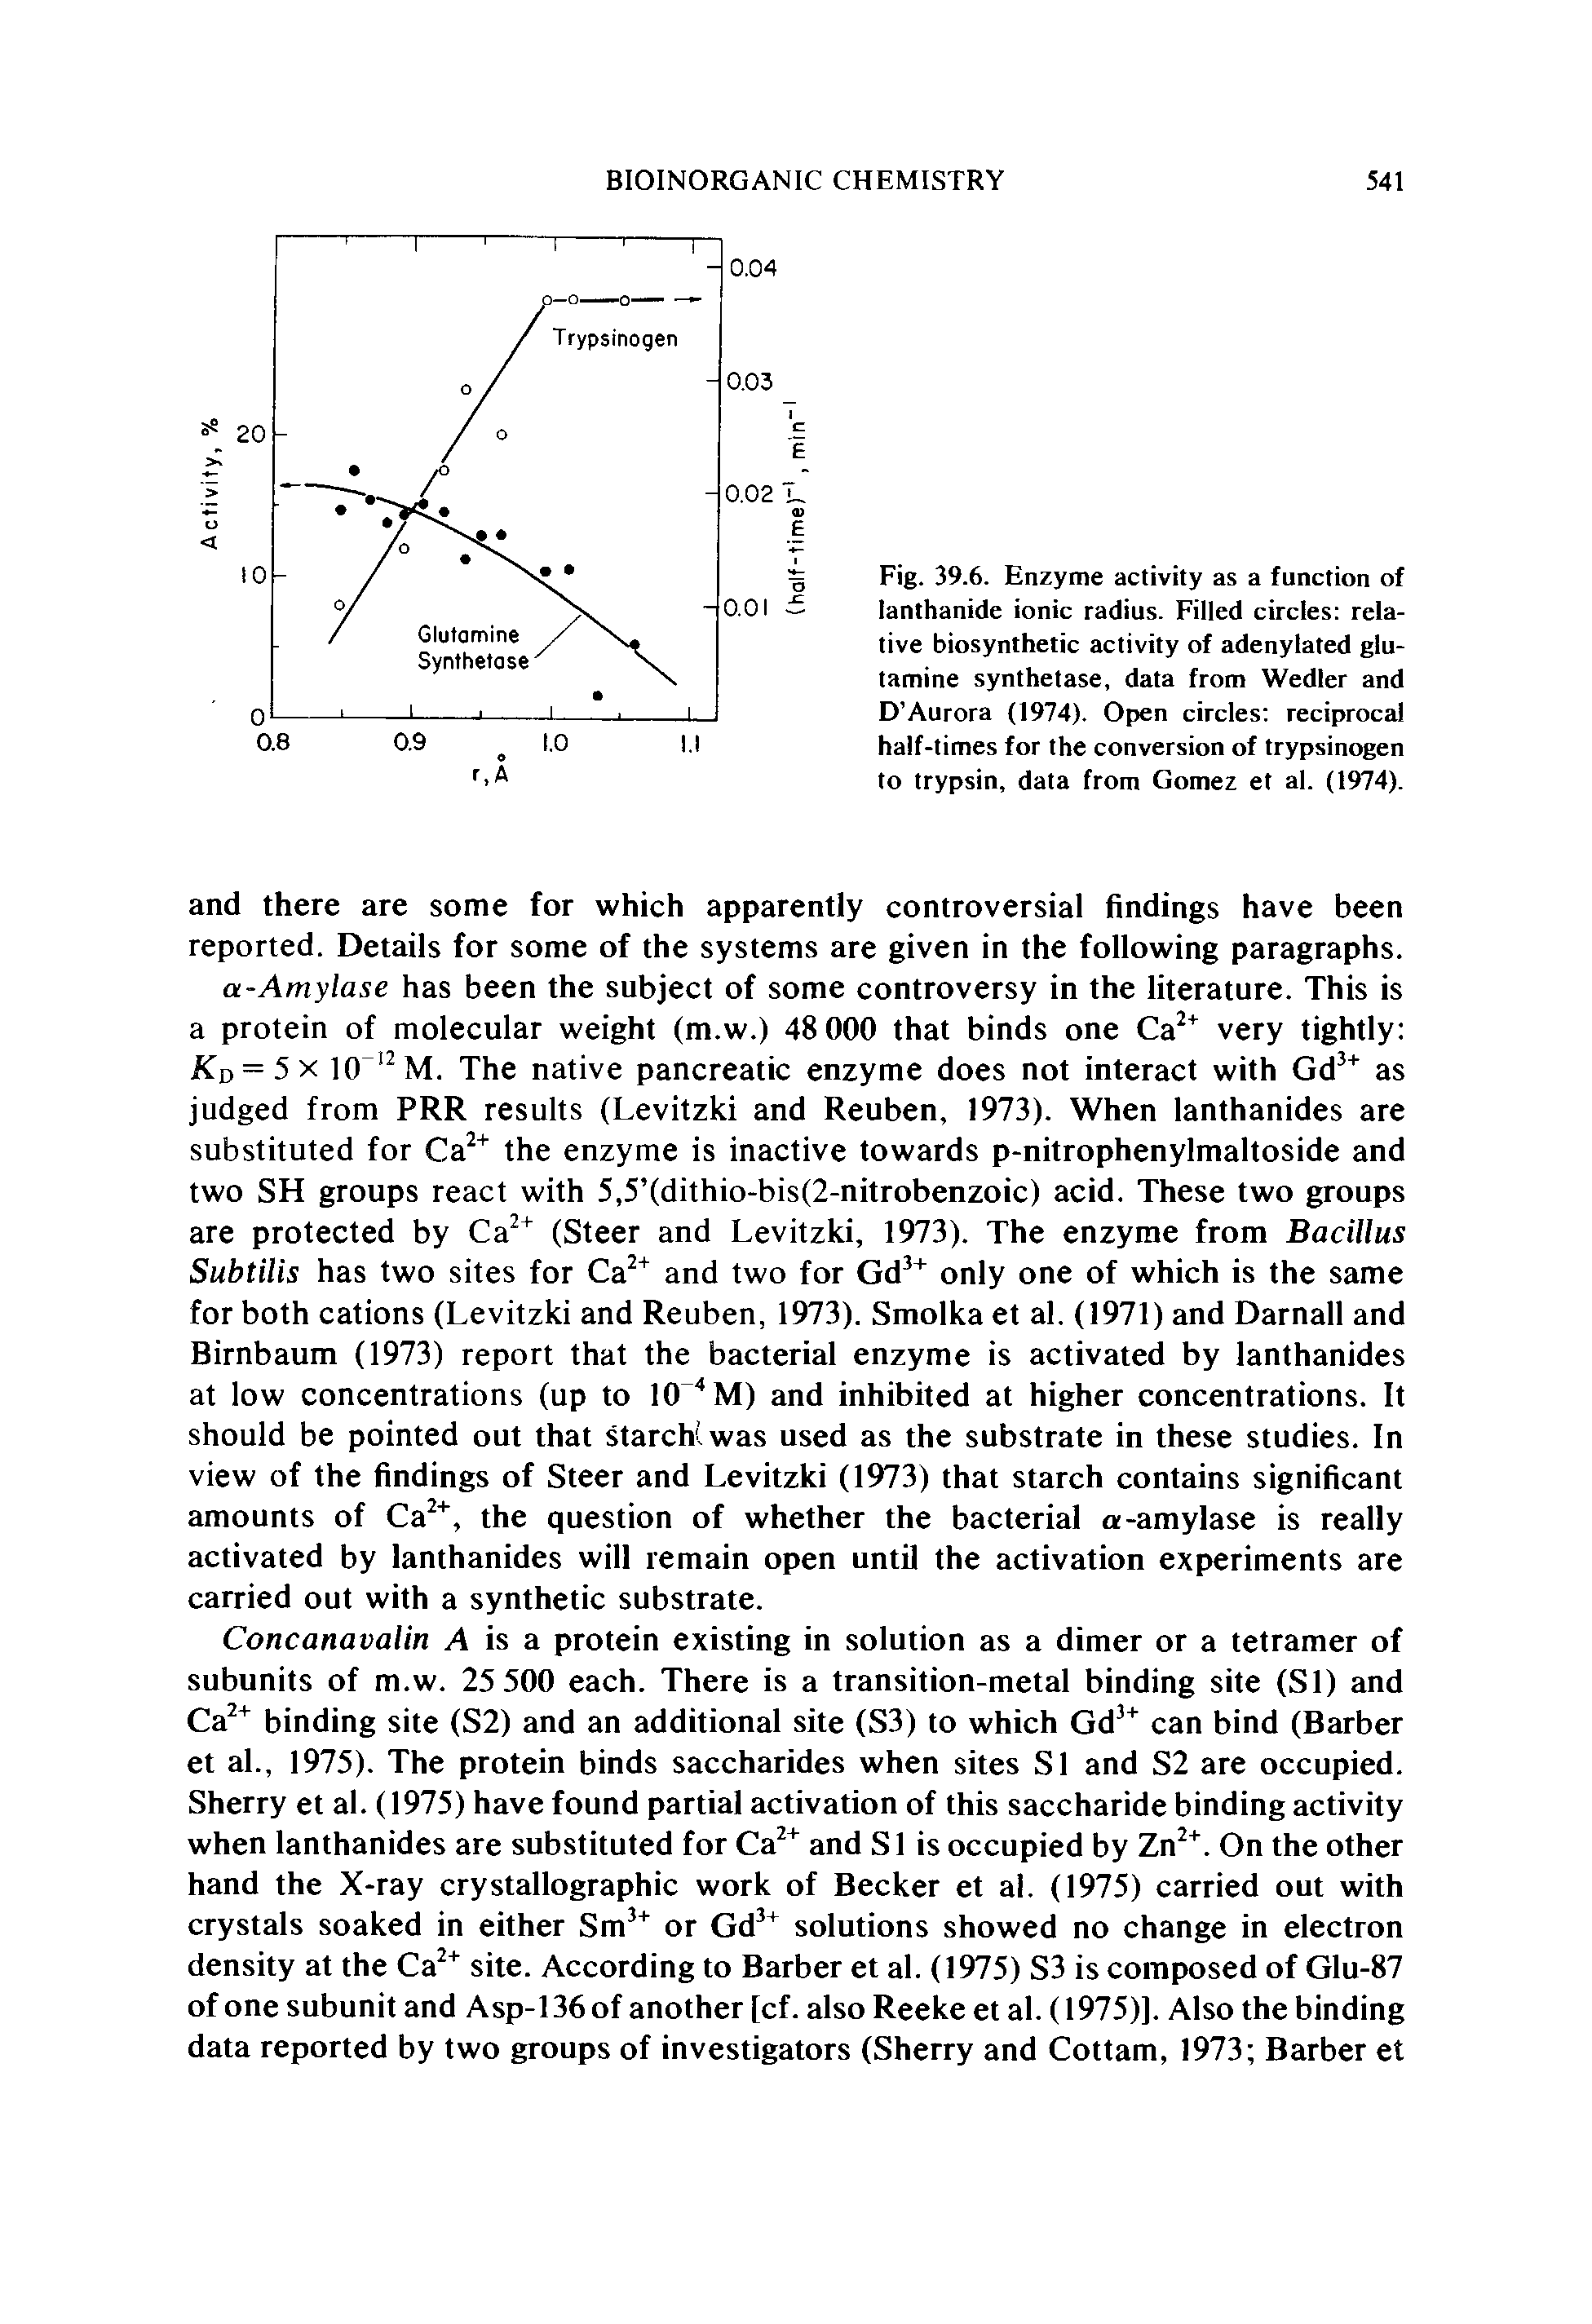 Fig. 39.6. Enzyme activity as a function of lanthanide ionic radius. Filled circles relative biosynthetic activity of adenylated glutamine synthetase, data from Wedler and D Aurora (1974). Open circles reciprocal half-times for the conversion of trypsinogen to trypsin, data from Gomez et al. (1974).